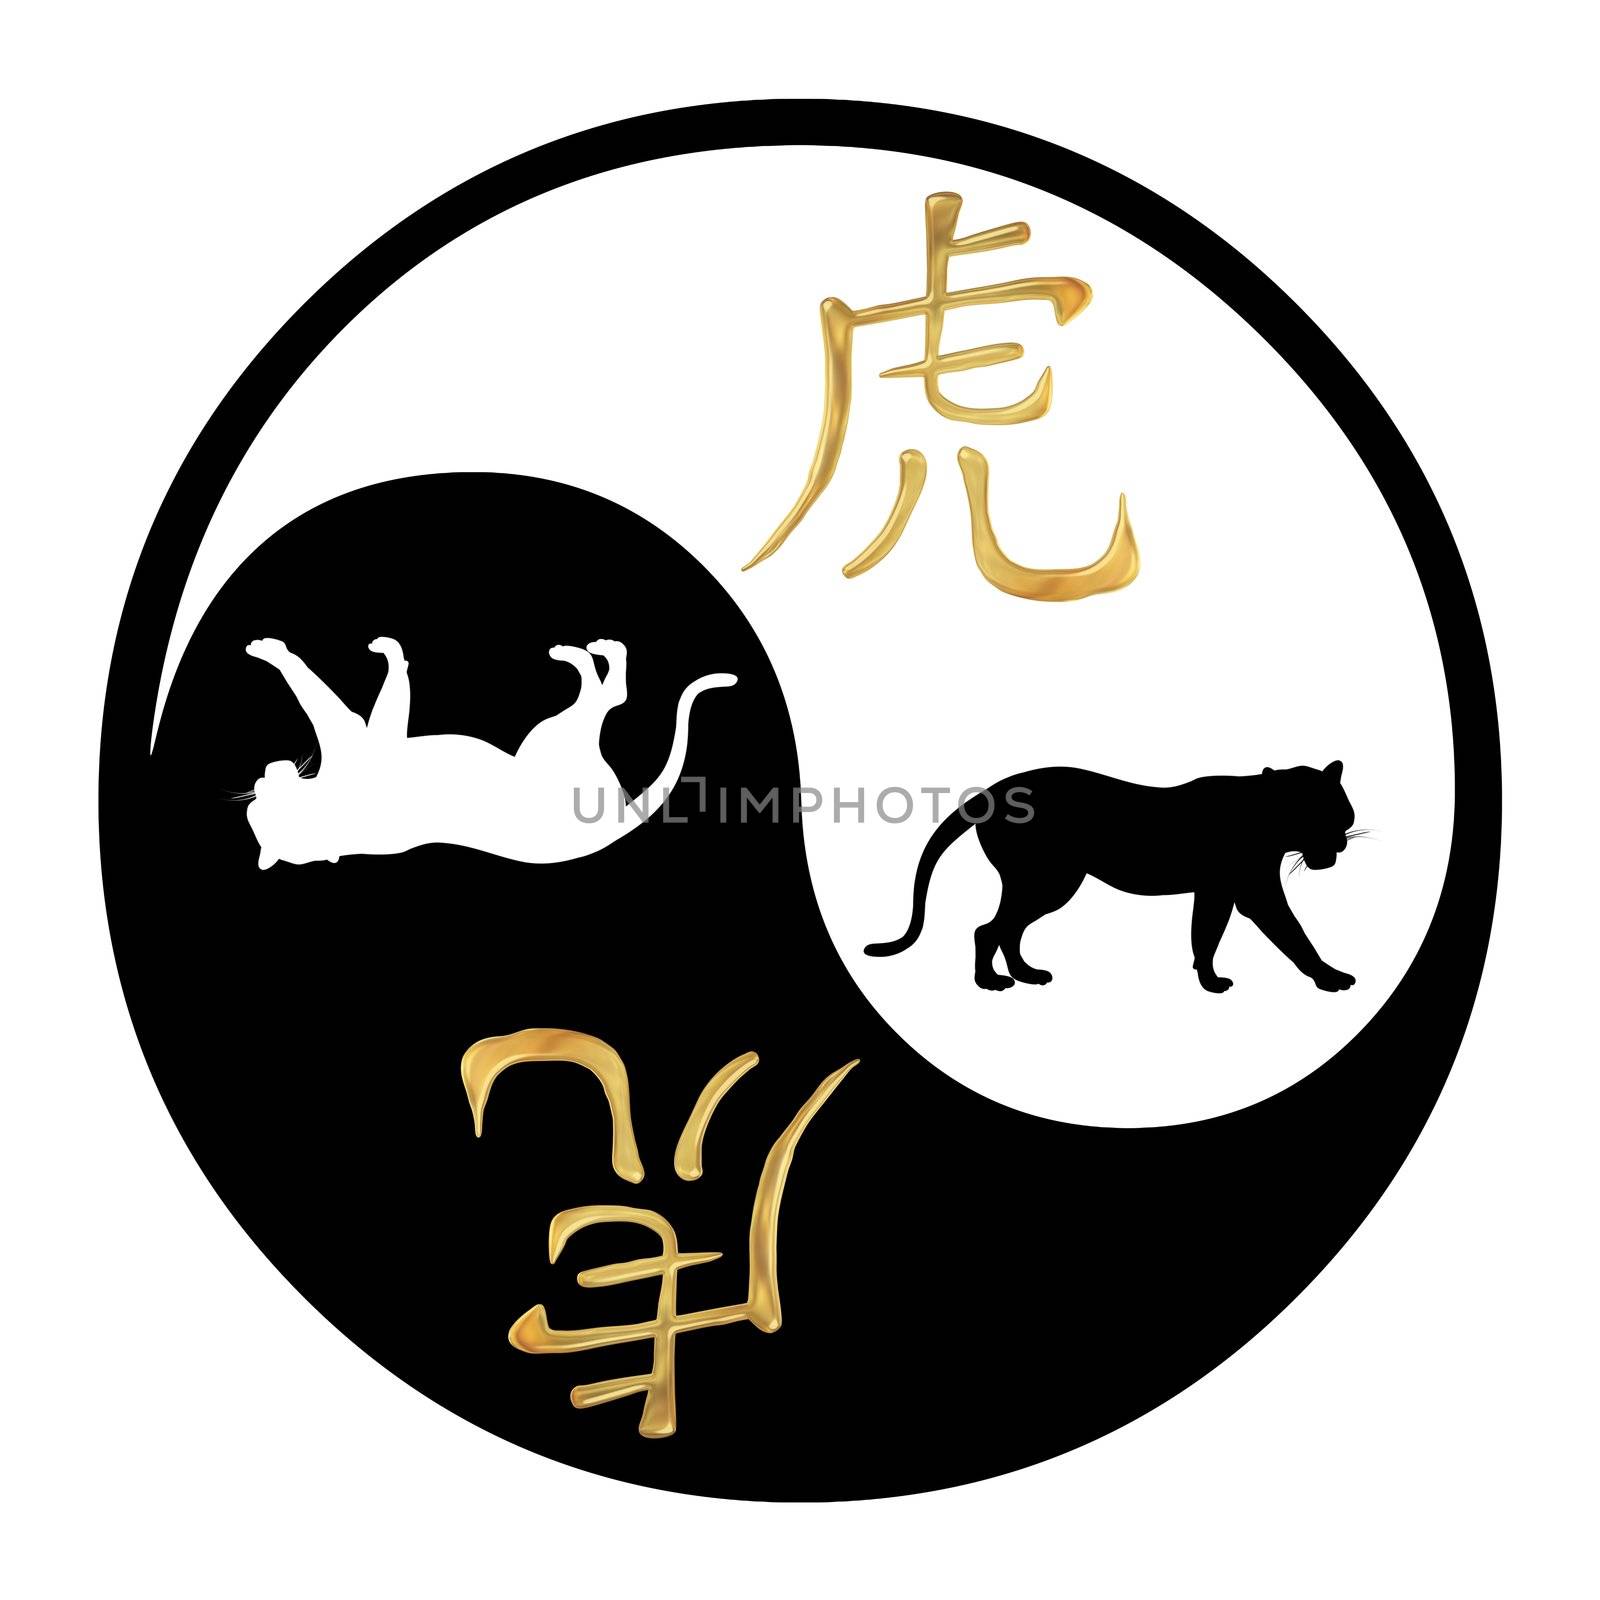 Yin Yang symbol with Chinese text and image of a Tiger